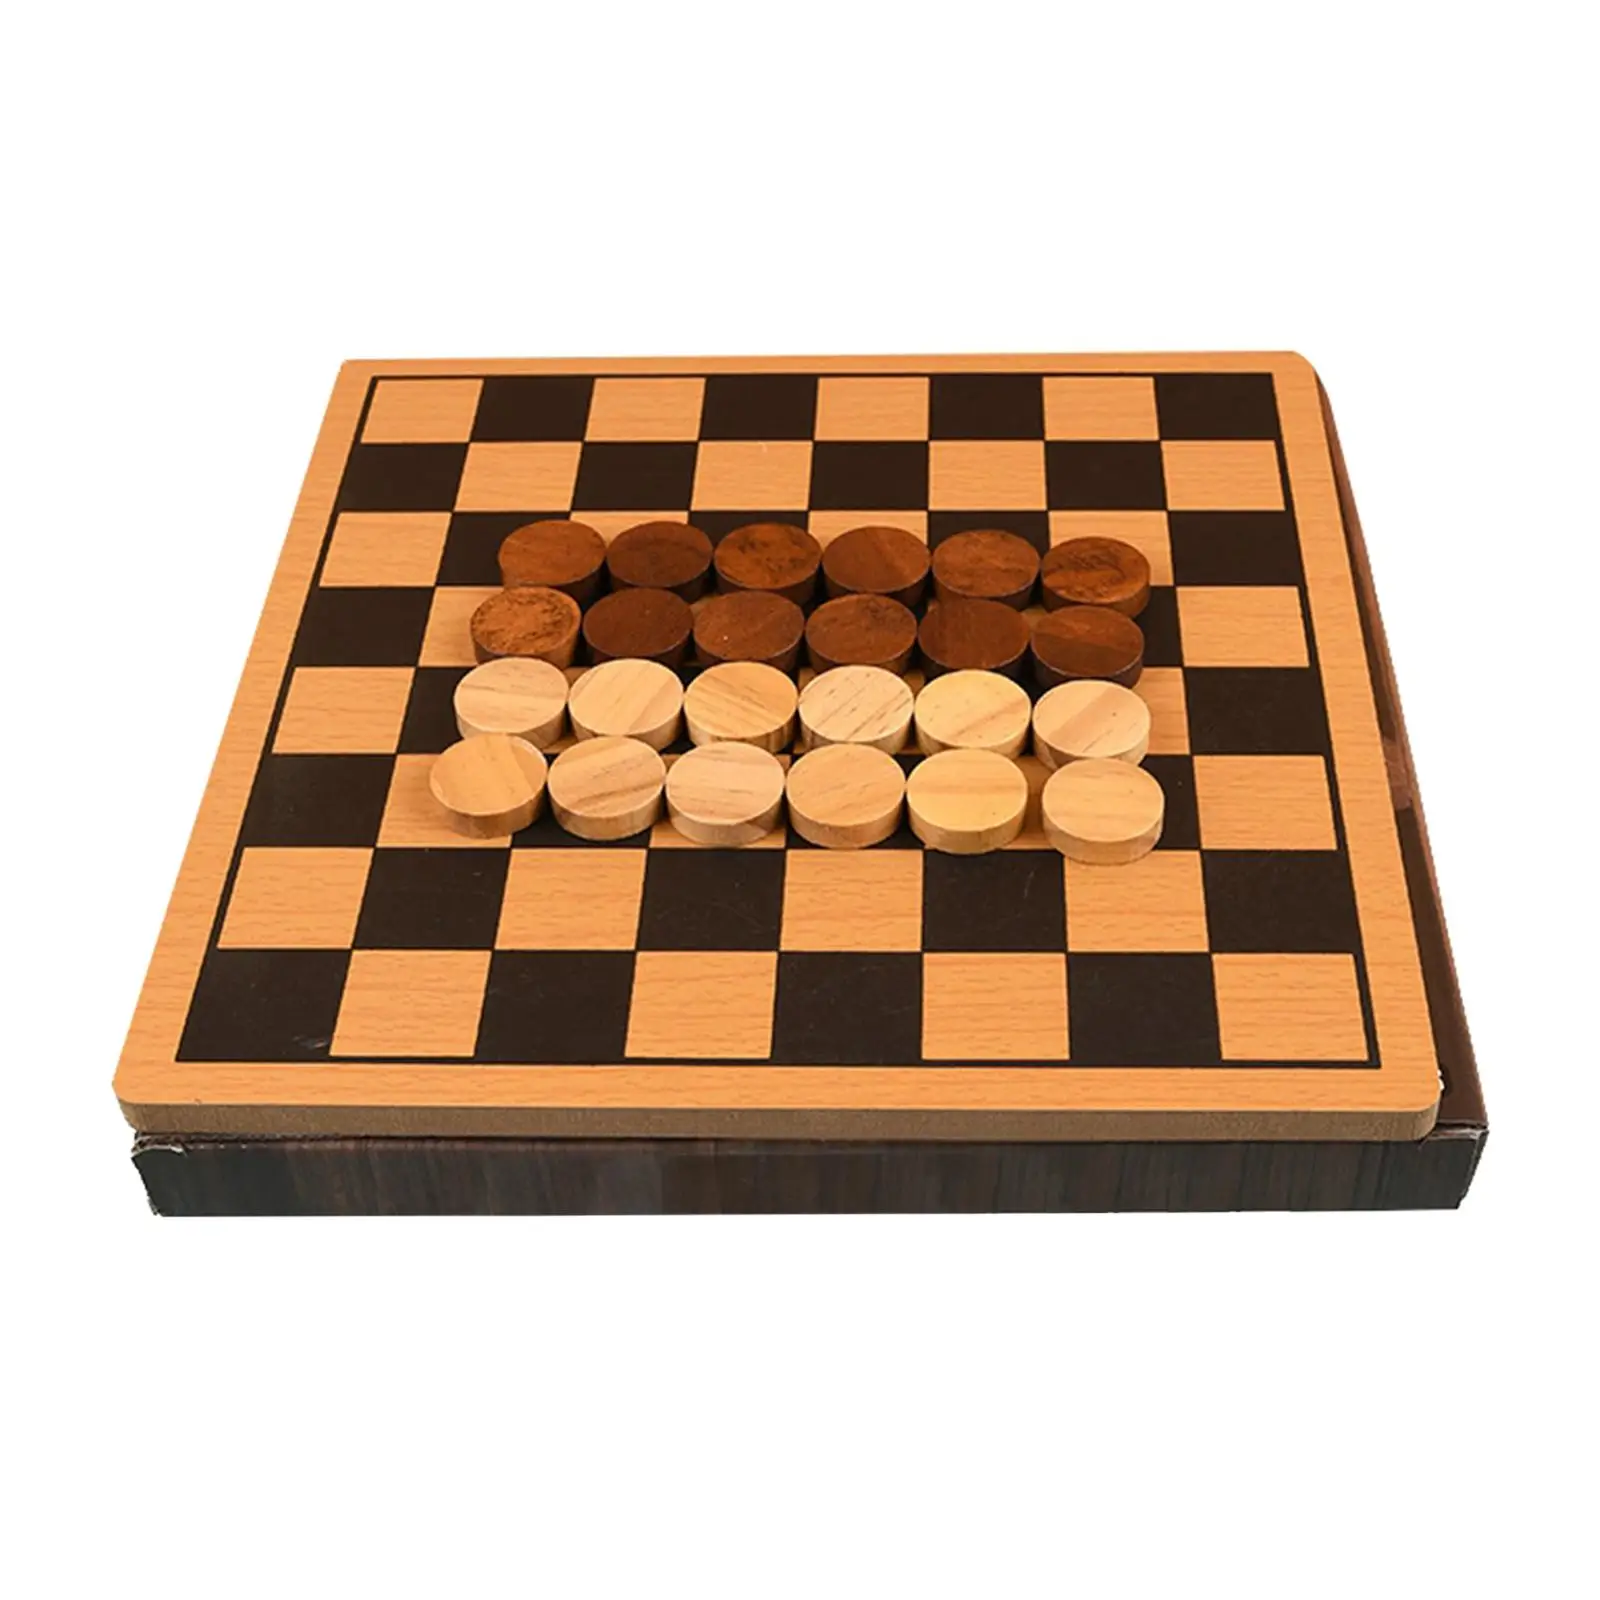 International Chess Game Set Playing Toys Decorative Vintage Style Chess Board Wood for Boys Girls Children Centerpieces